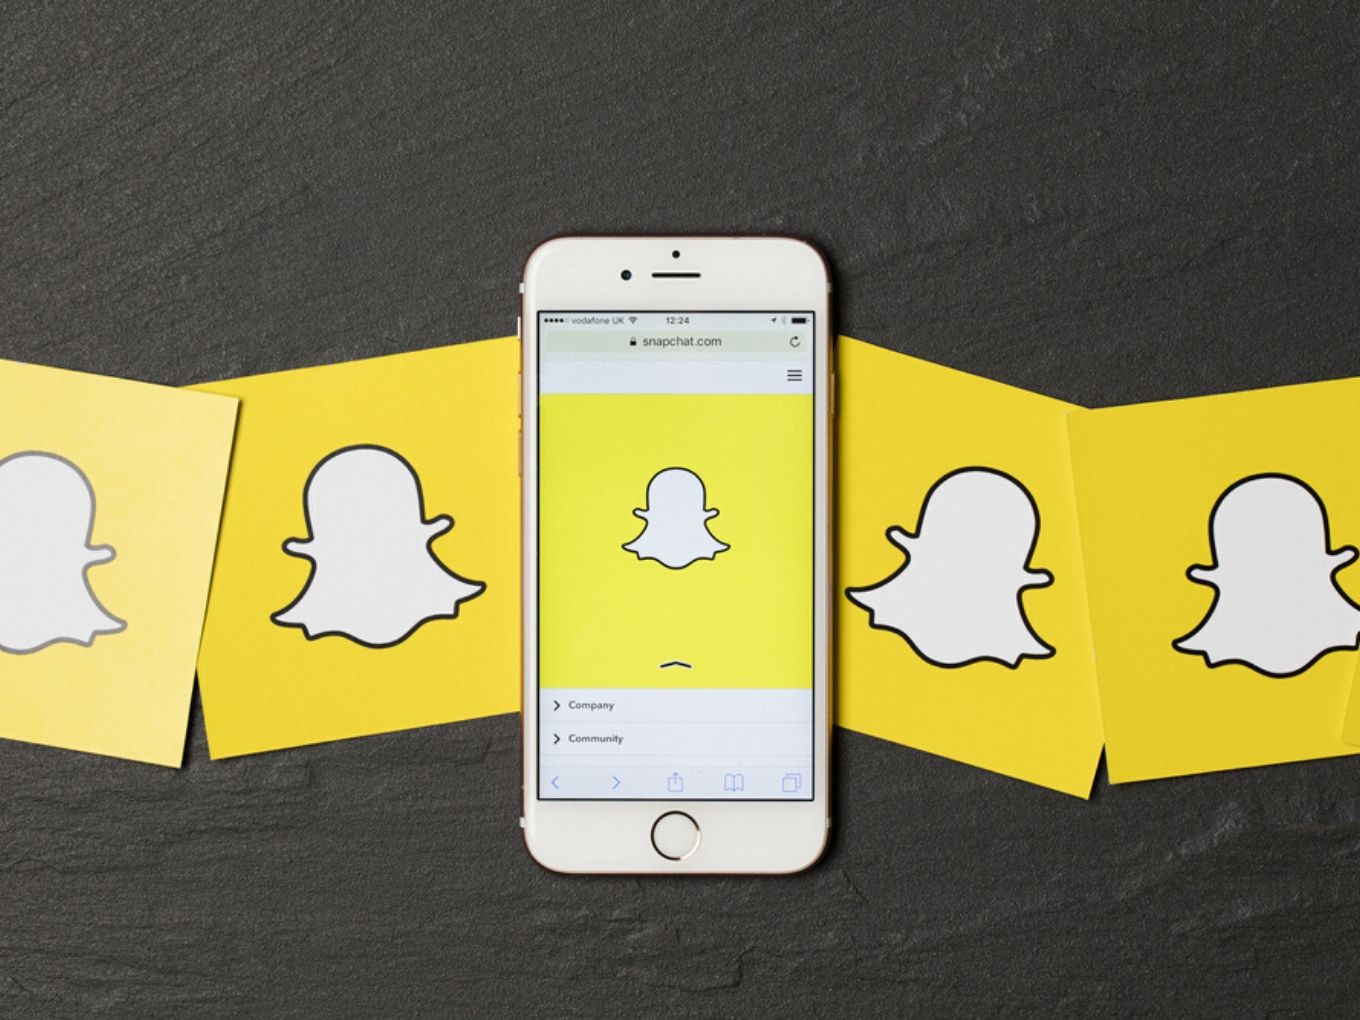 Snapchat Records 120% Hike In Daily Active Users From India